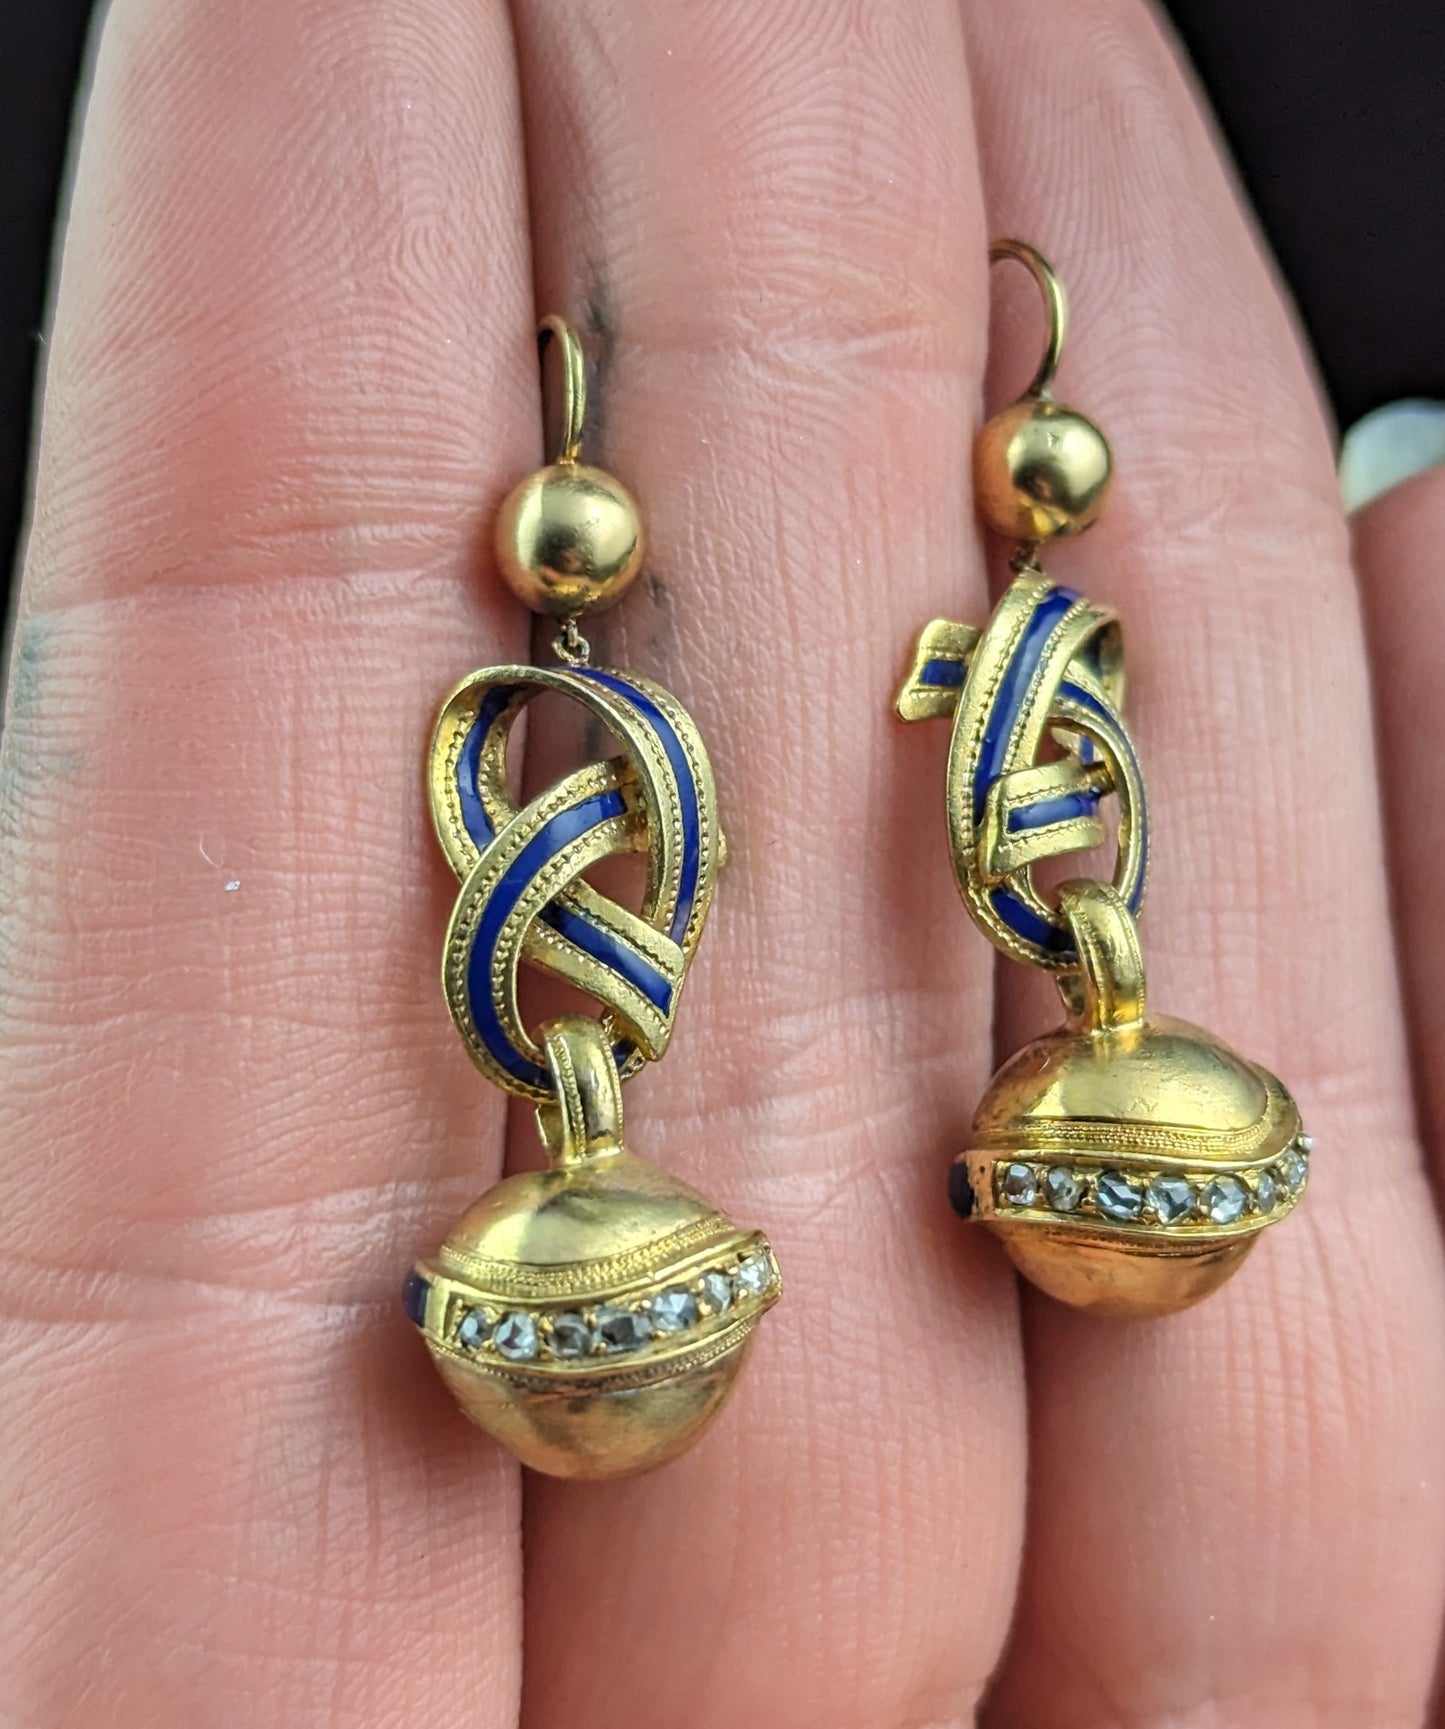 Antique Victorian Diamond lovers knot earrings, 15ct gold and Blue enamel